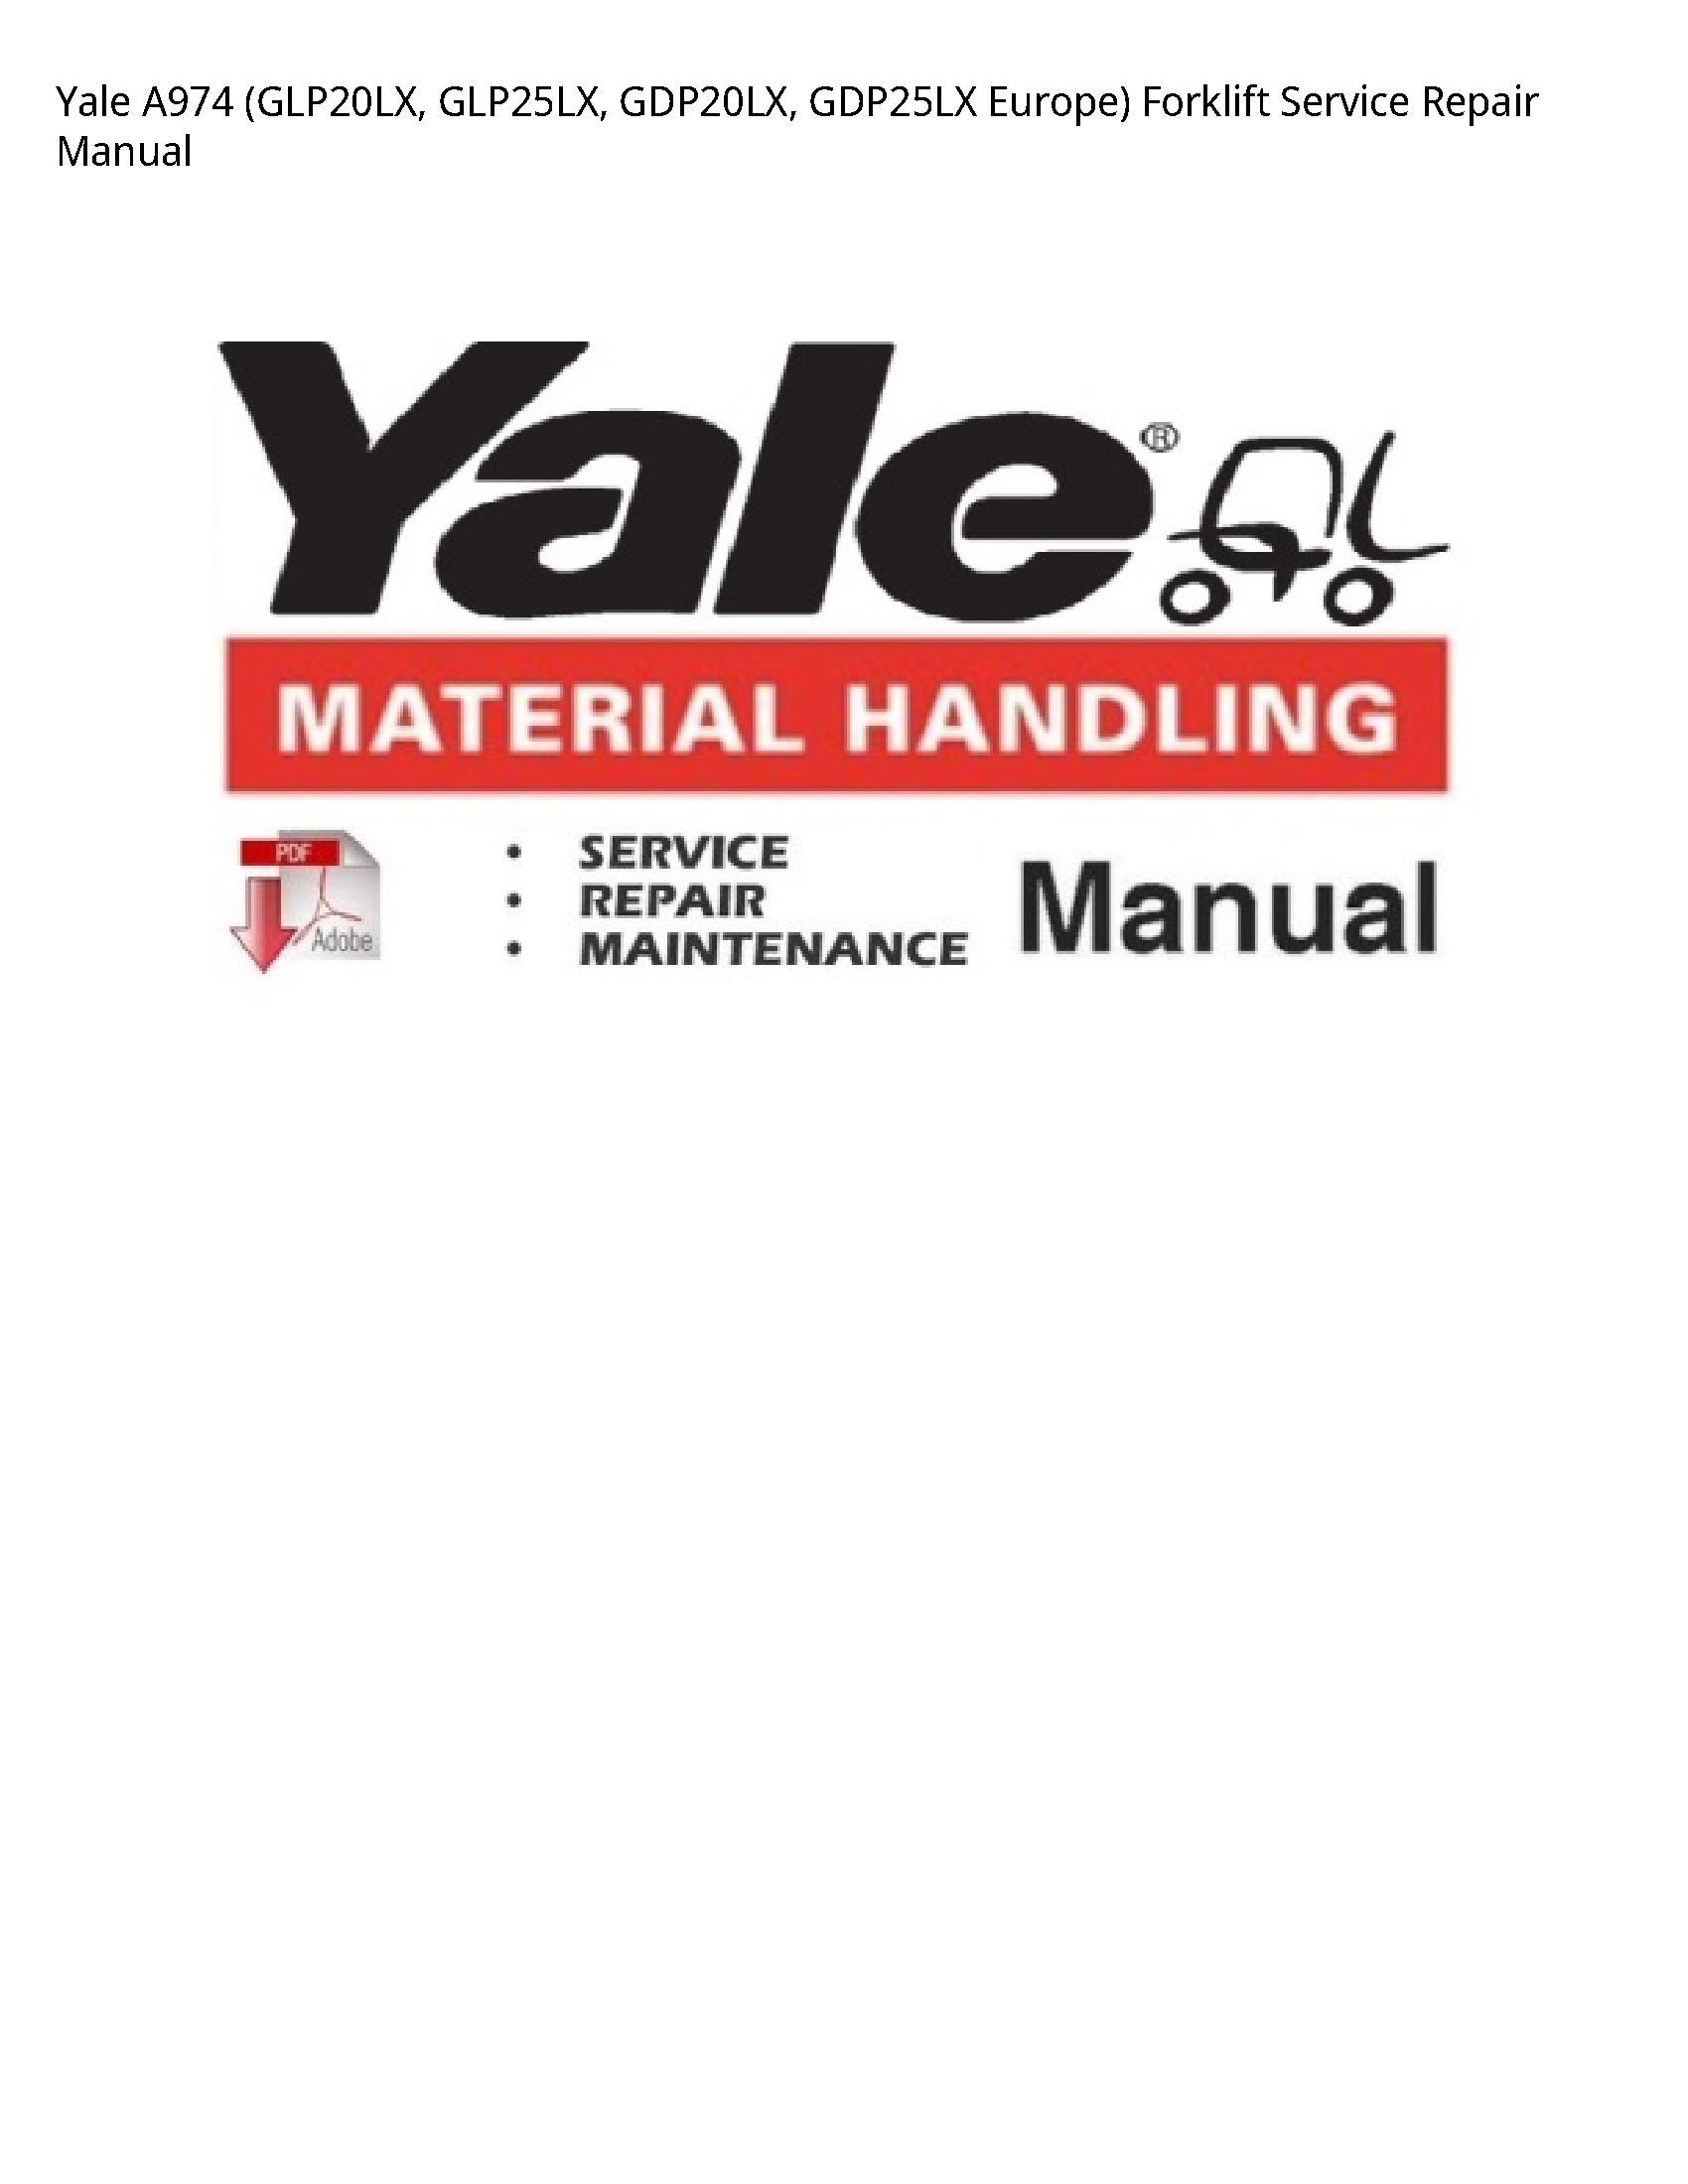 Yale A974 Europe) Forklift manual